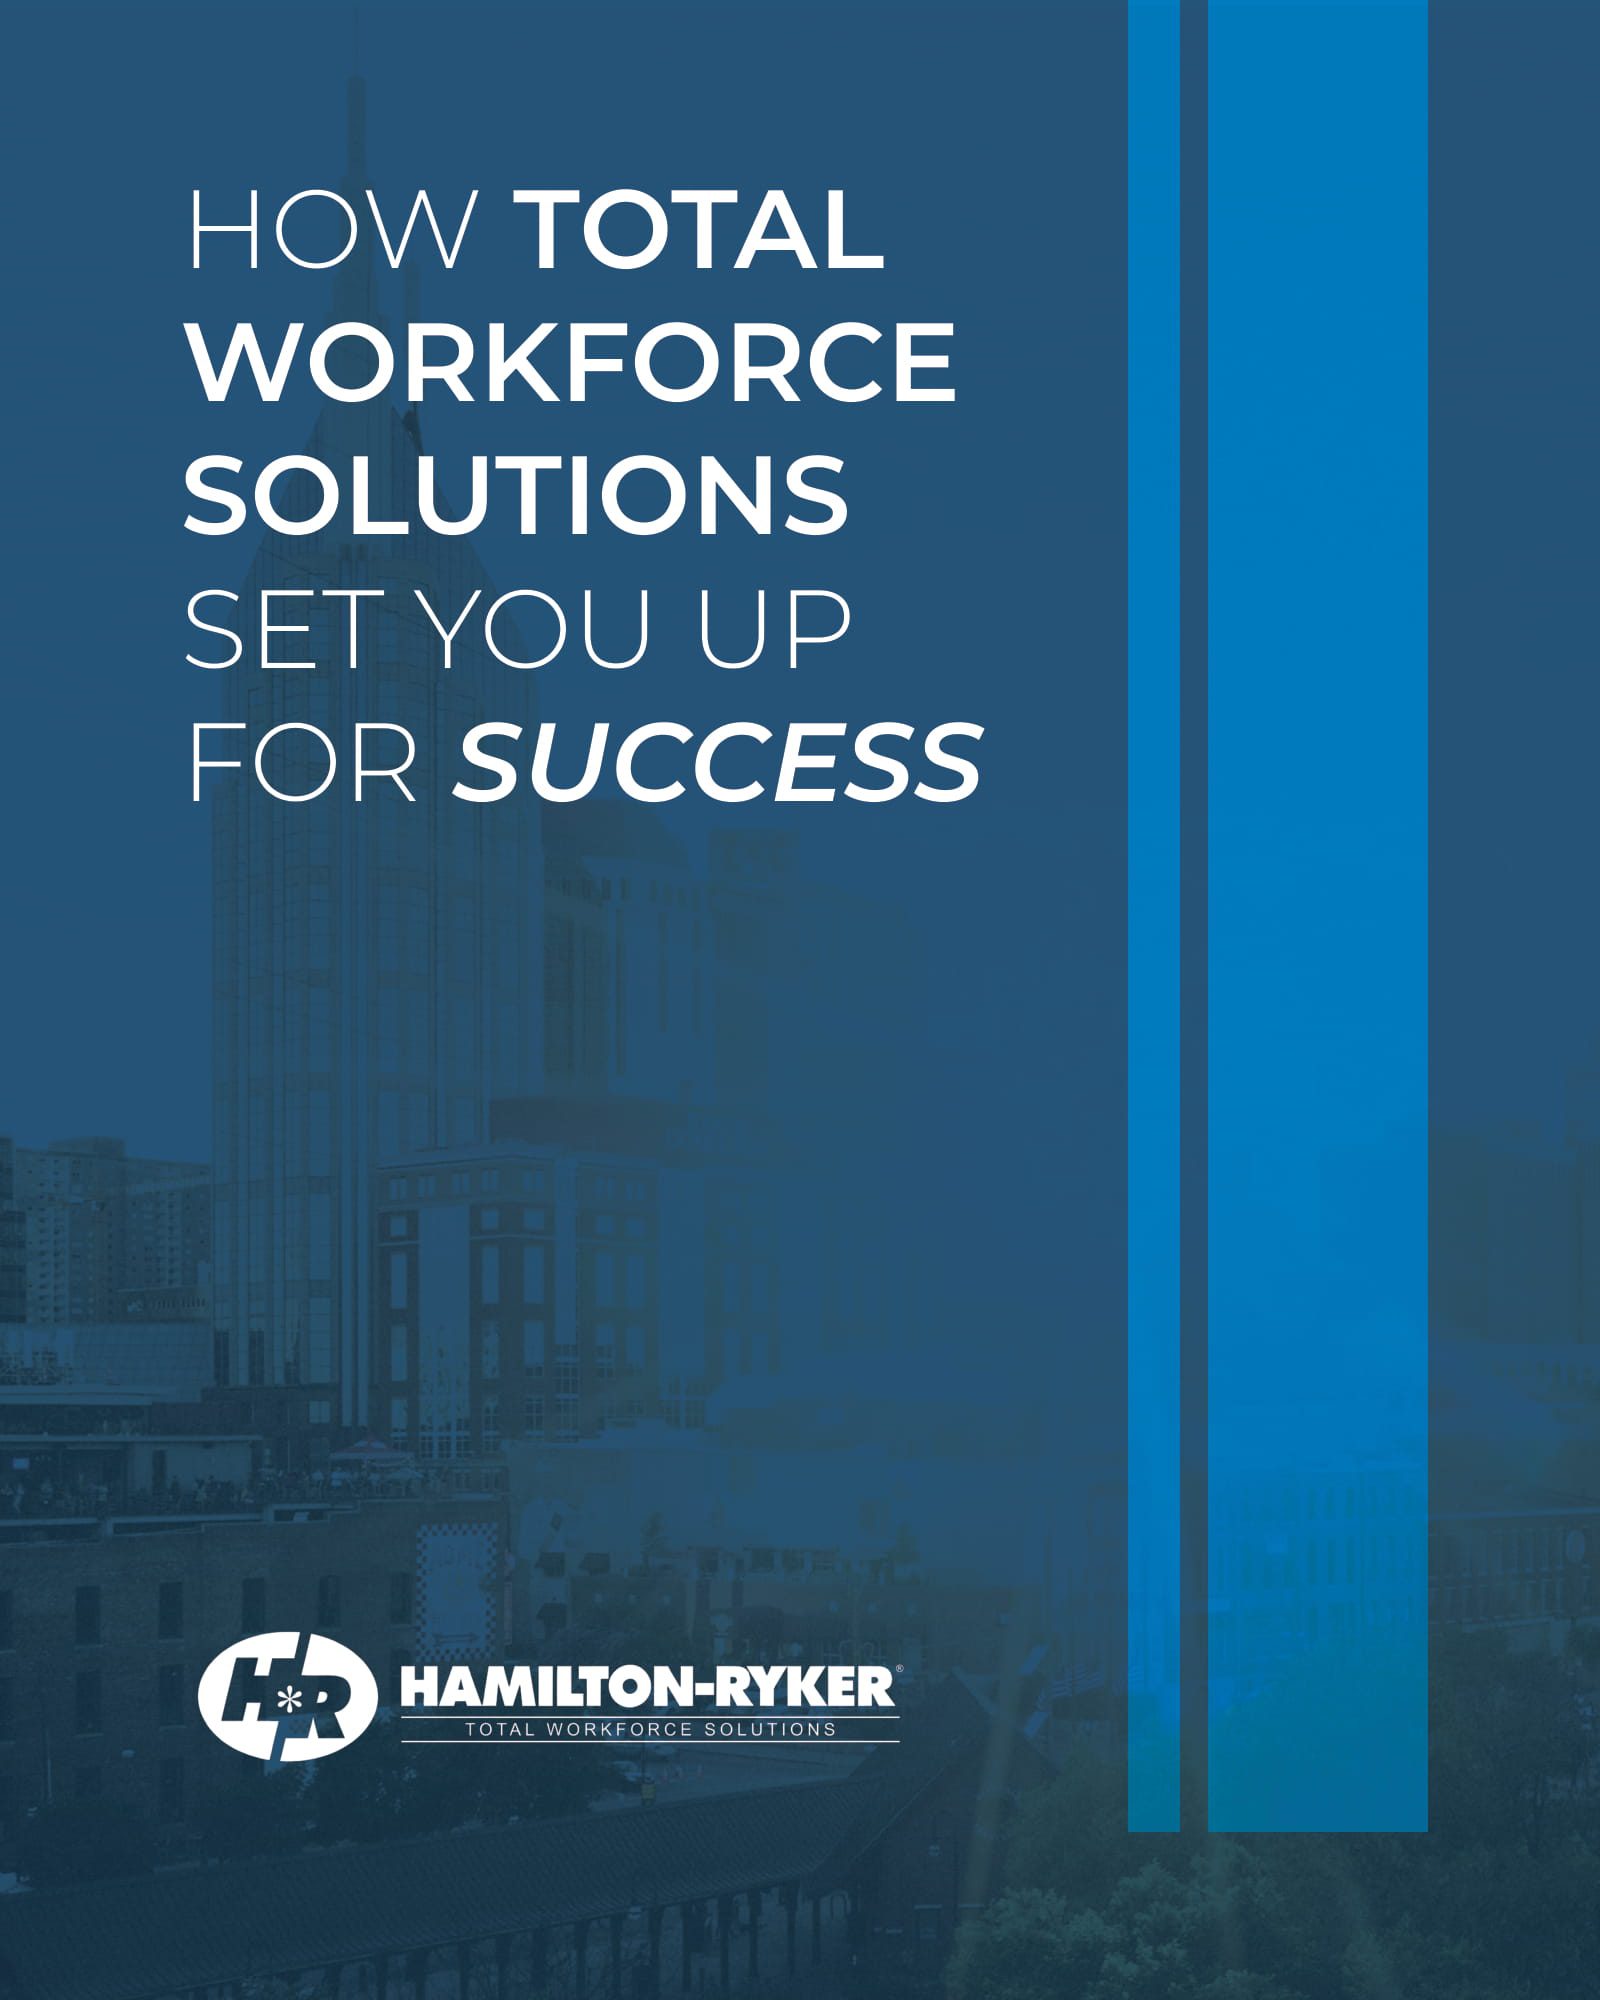 How Total Workforce Development Solutions book will set you up for success, by Hamilton Ryker staffing agency